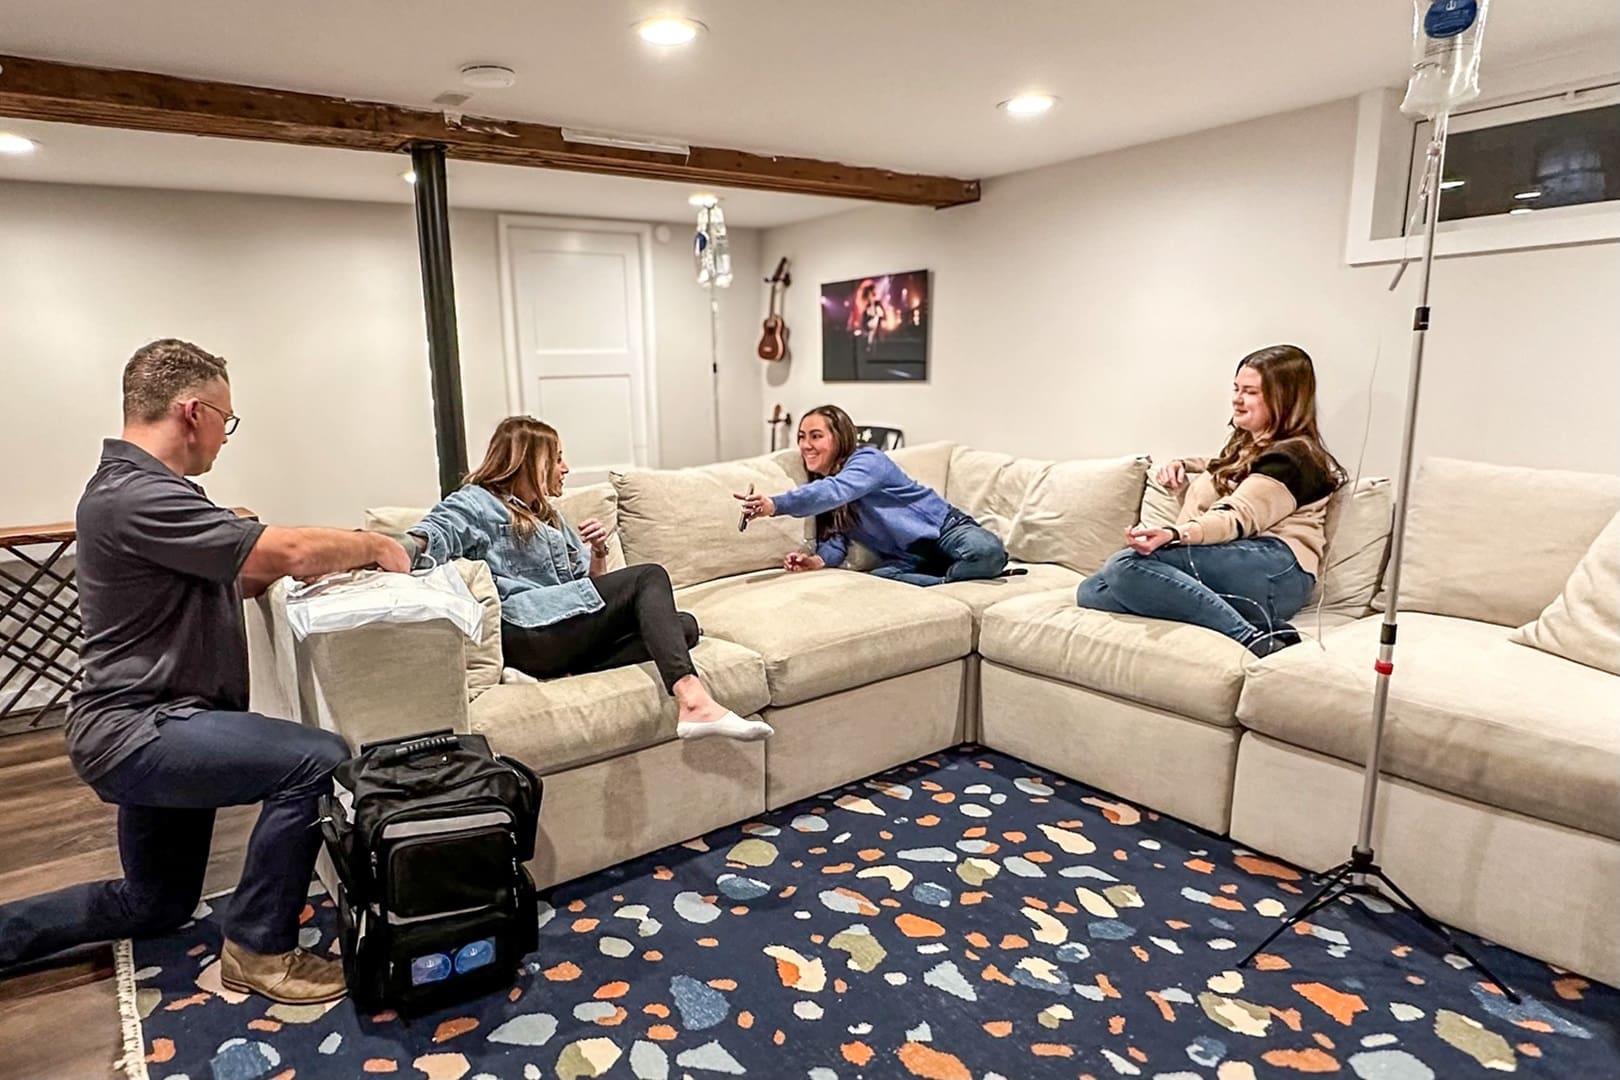 Group of friends enjoying a casual conversation in a cozy living room with a comfortable sofa and considering mobile iv therapy for vitamins.